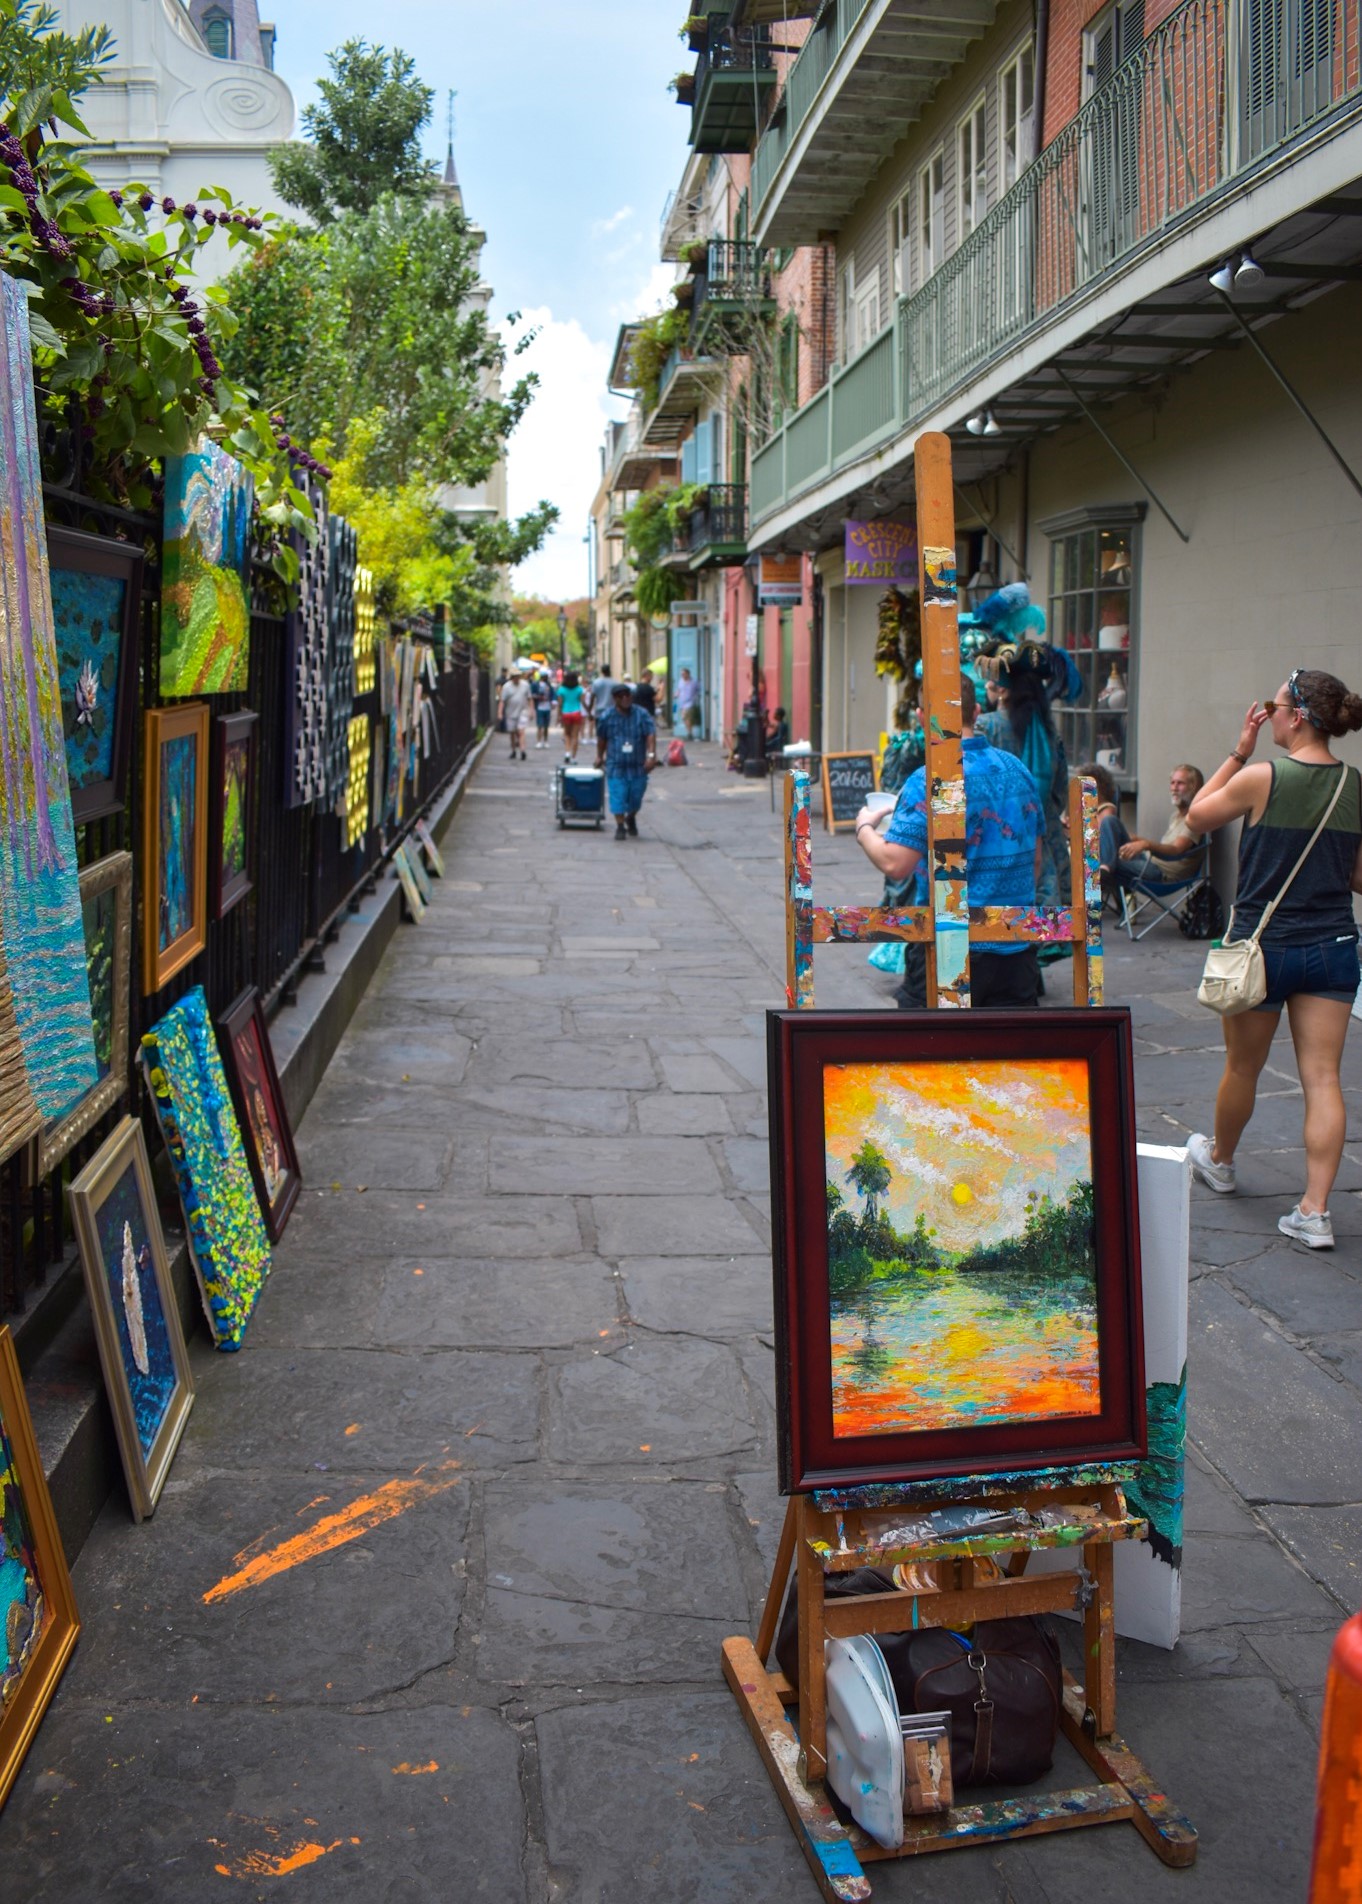 Explore street art on your 3-day trip to New Orleans